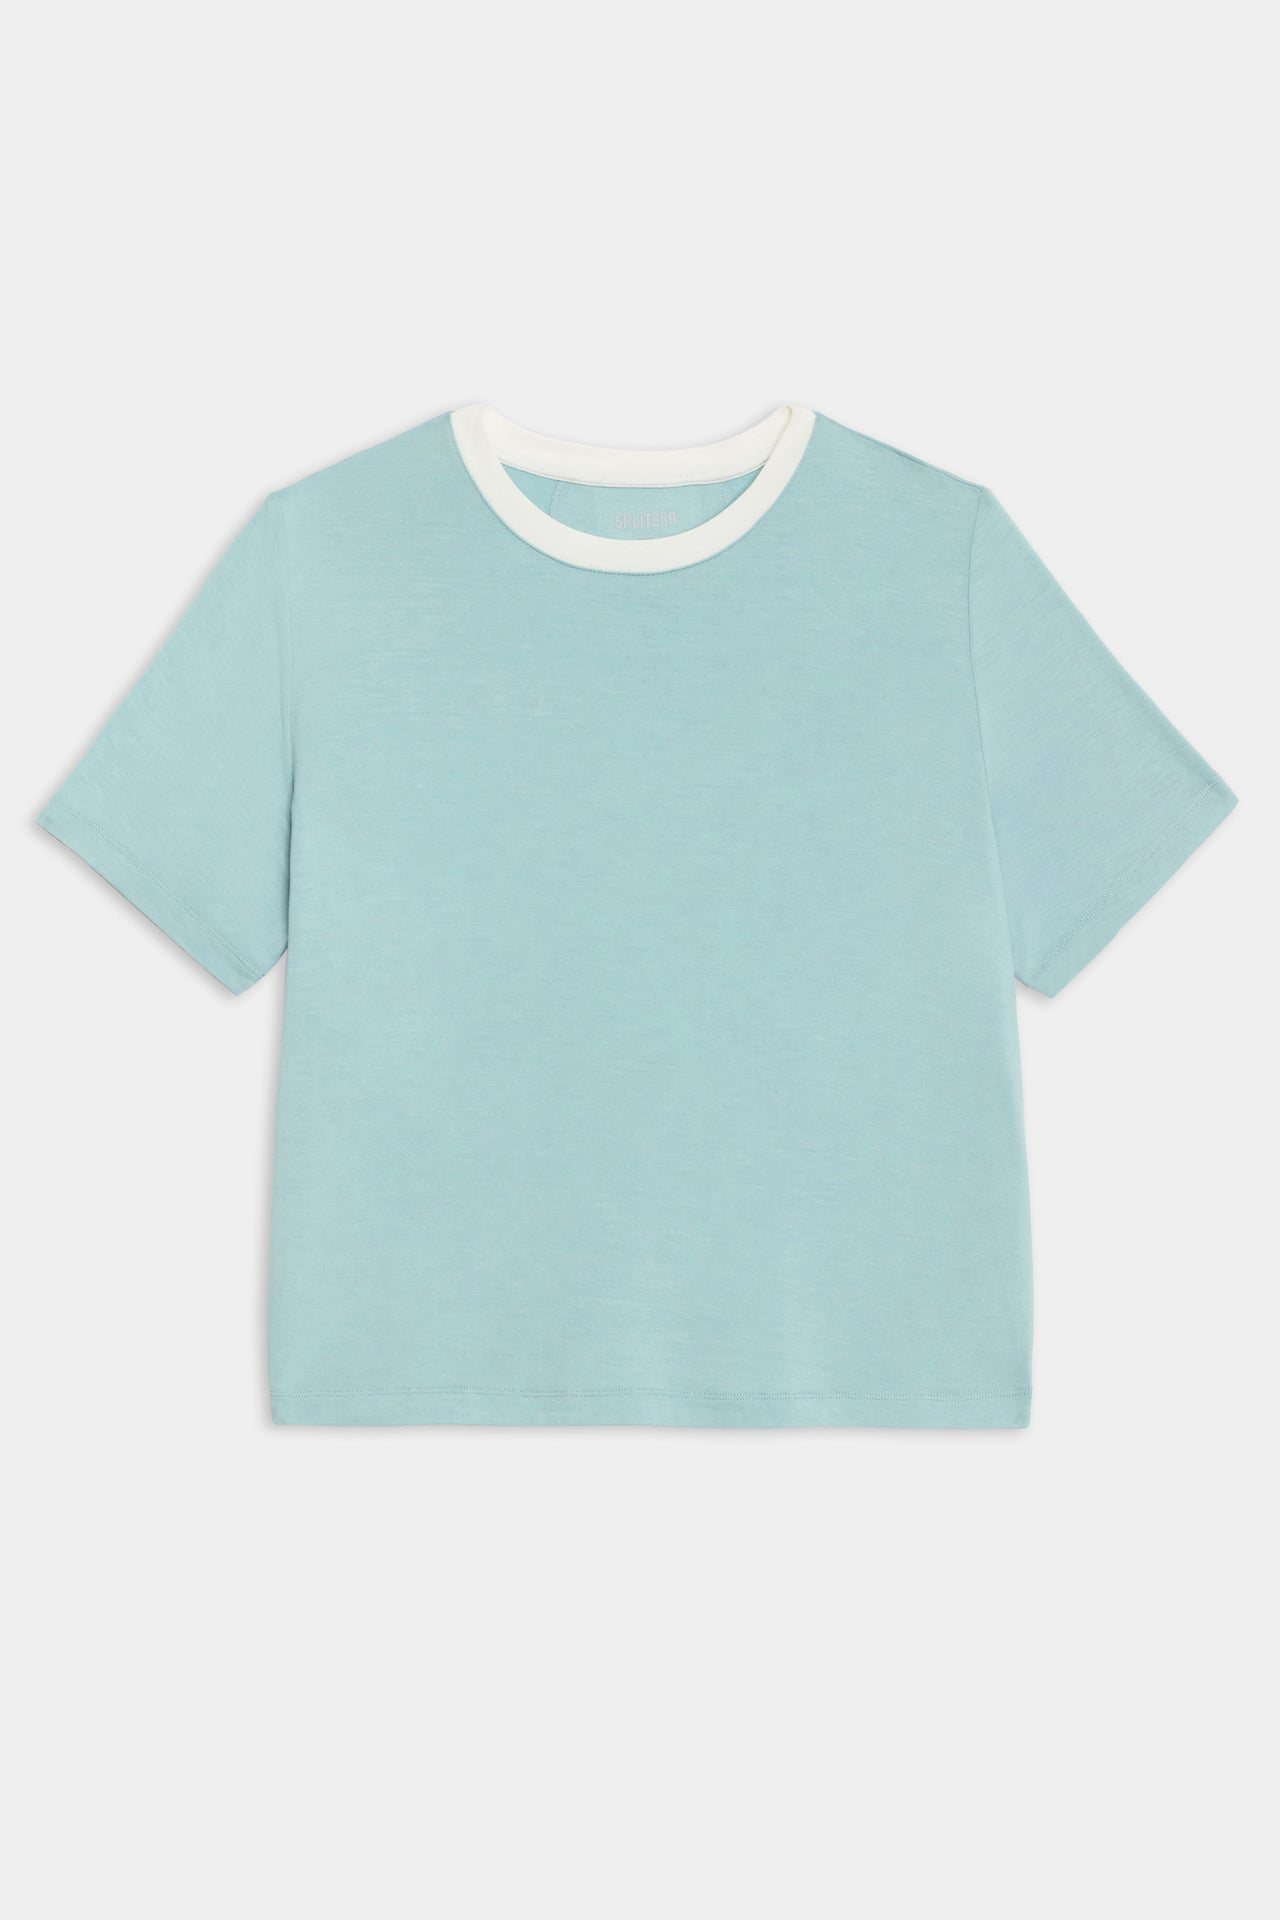 Flat view of light blue cropped short sleeve t-shirt with thin white neck hem 